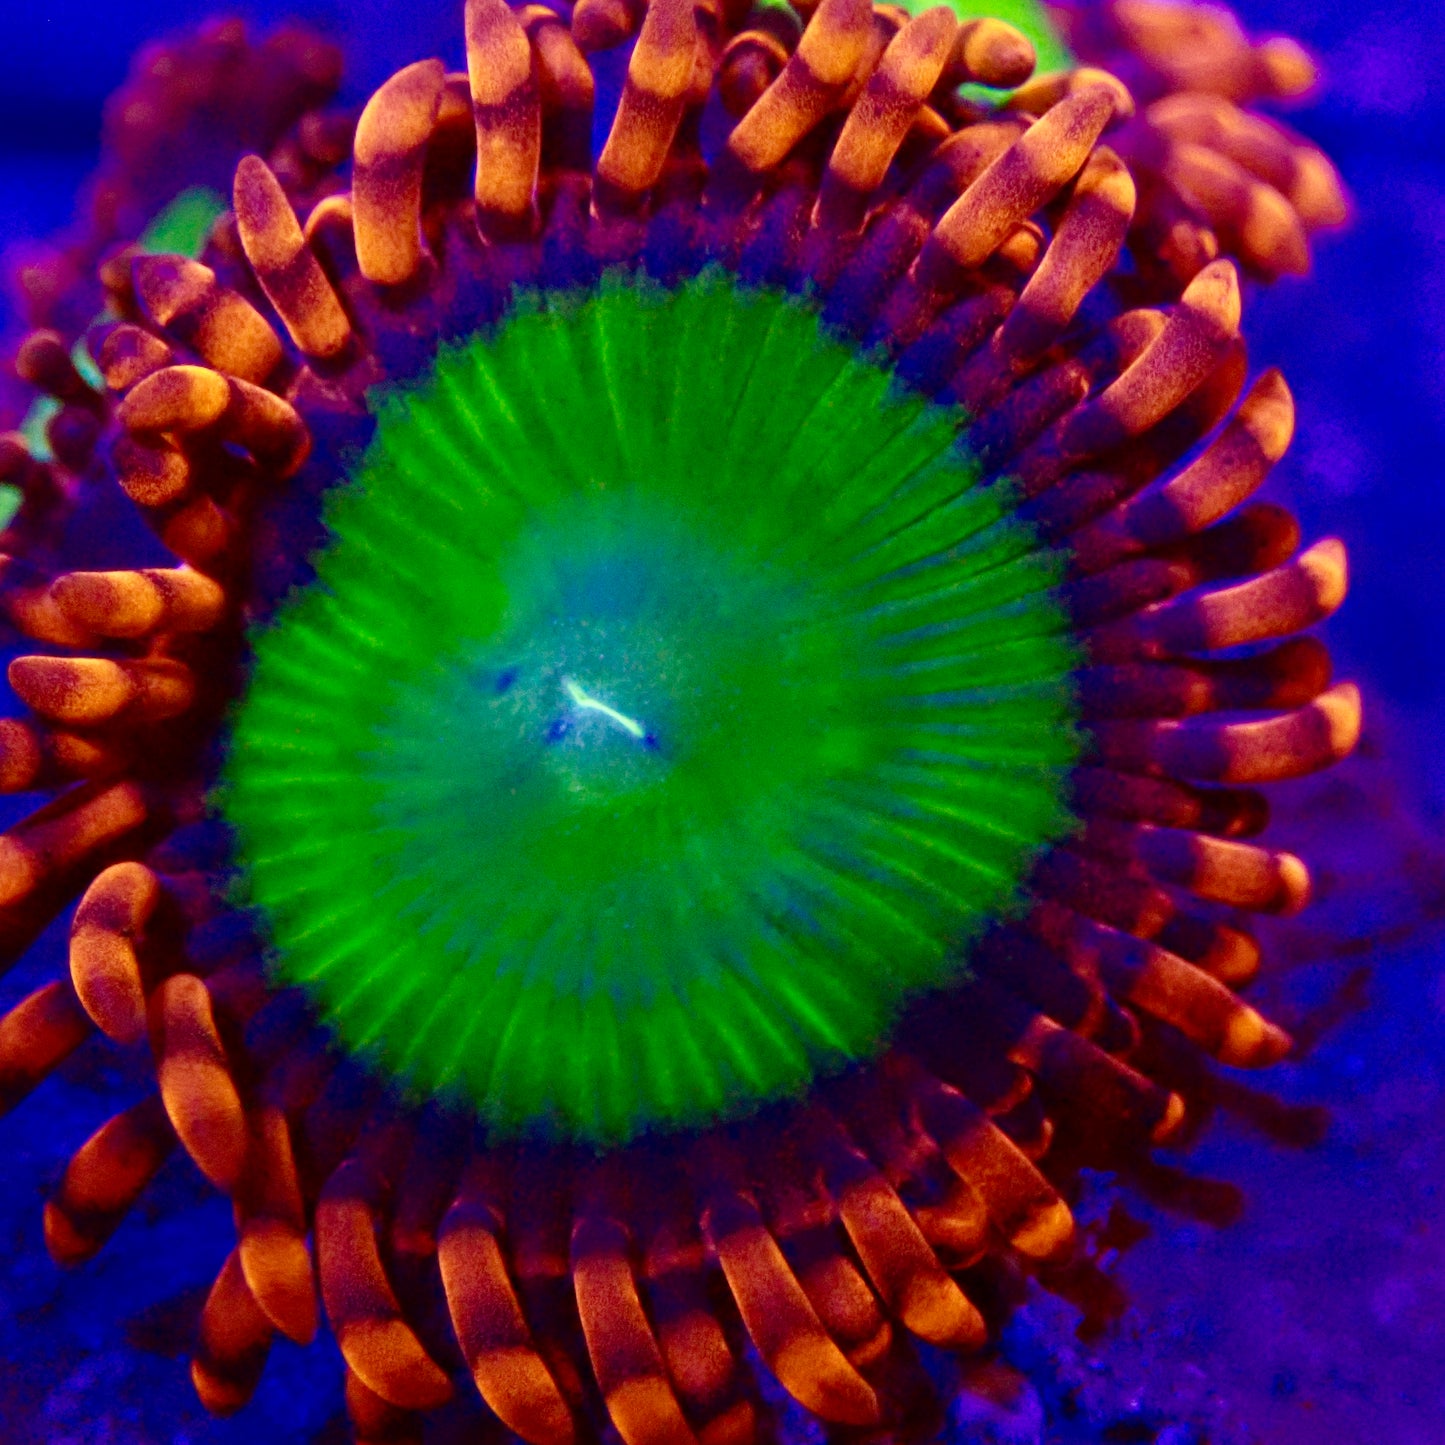 Candy Apple Red Zoanthids Per Polyp